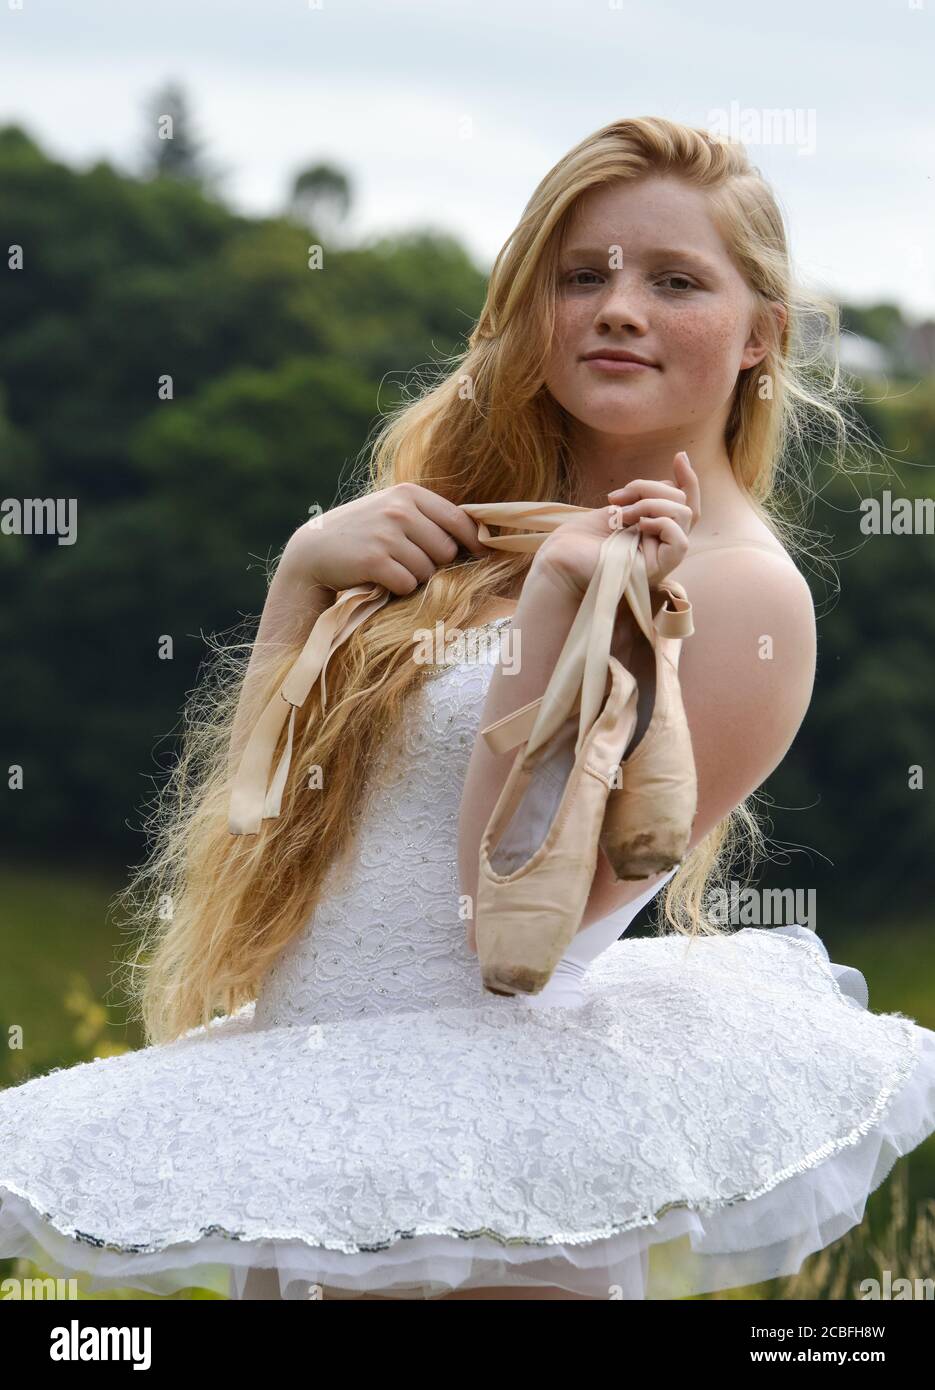 A ballerina with long blonde hair and freckles staring into the camera, holding her pointe shoes. She is wearing a white tutu. Stock Photo